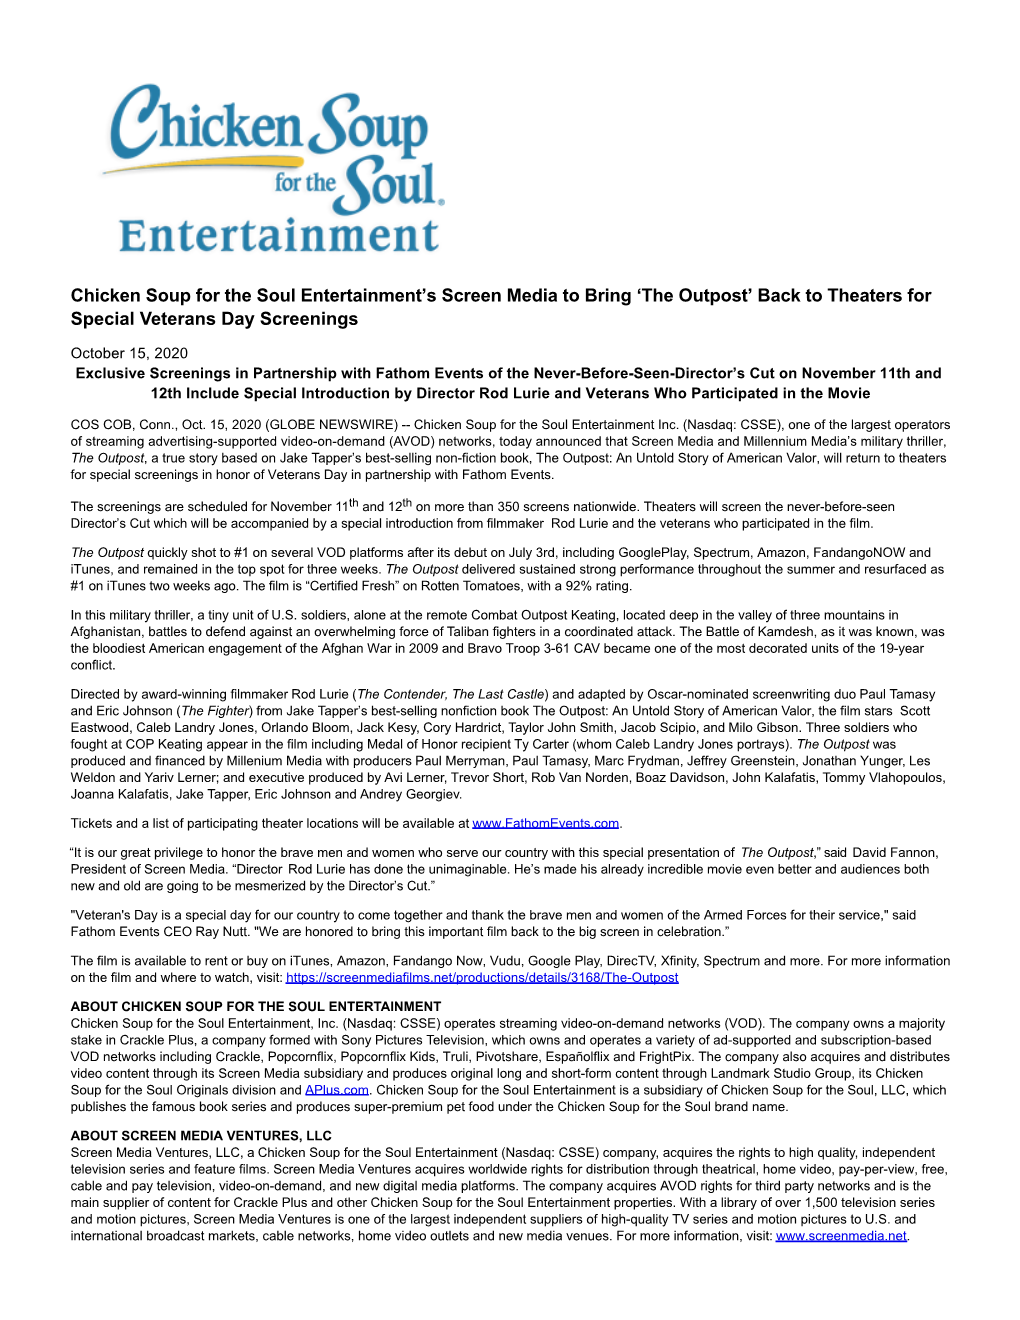 Chicken Soup for the Soul Entertainment's Screen Media to Bring